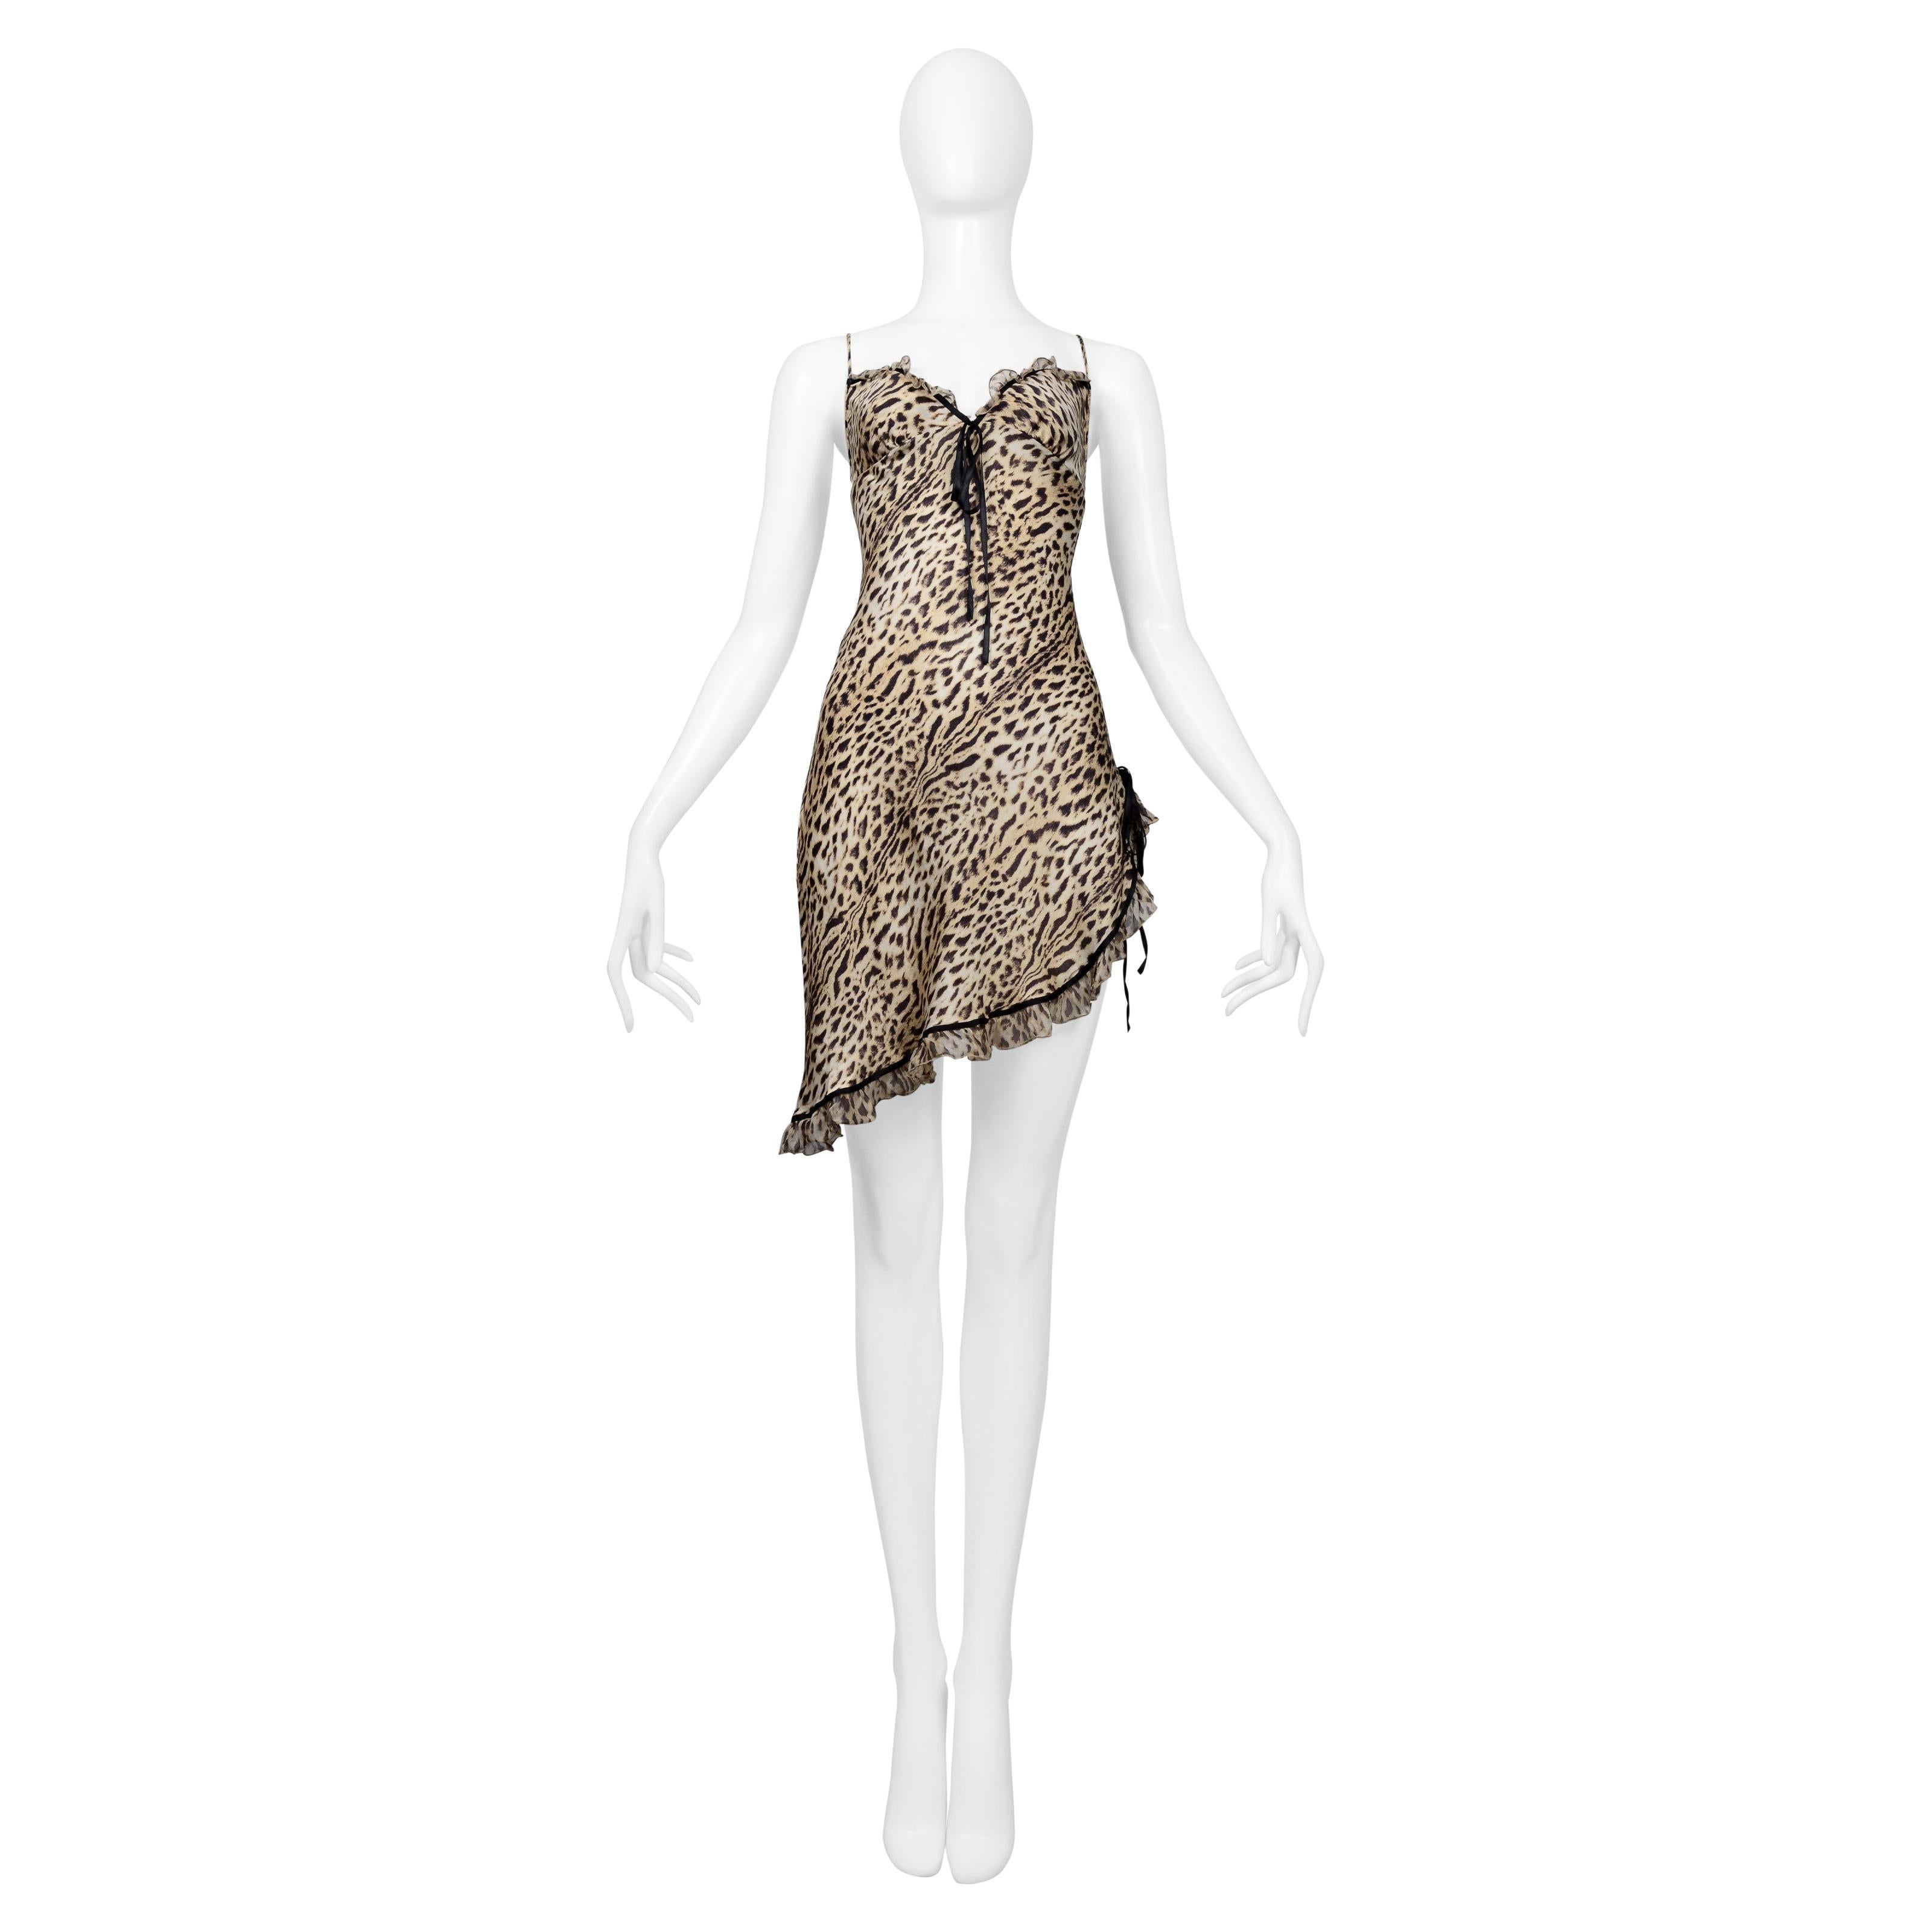 Resurrection Vintage is excited to offer a vintage Roberto Cavalli mini leopard silk slip dress featuring an asymmetrical hem at bottom with ruffle accents, high slit up right hip with black ribbon bow detail, sweetheart neckline with ruffle accents